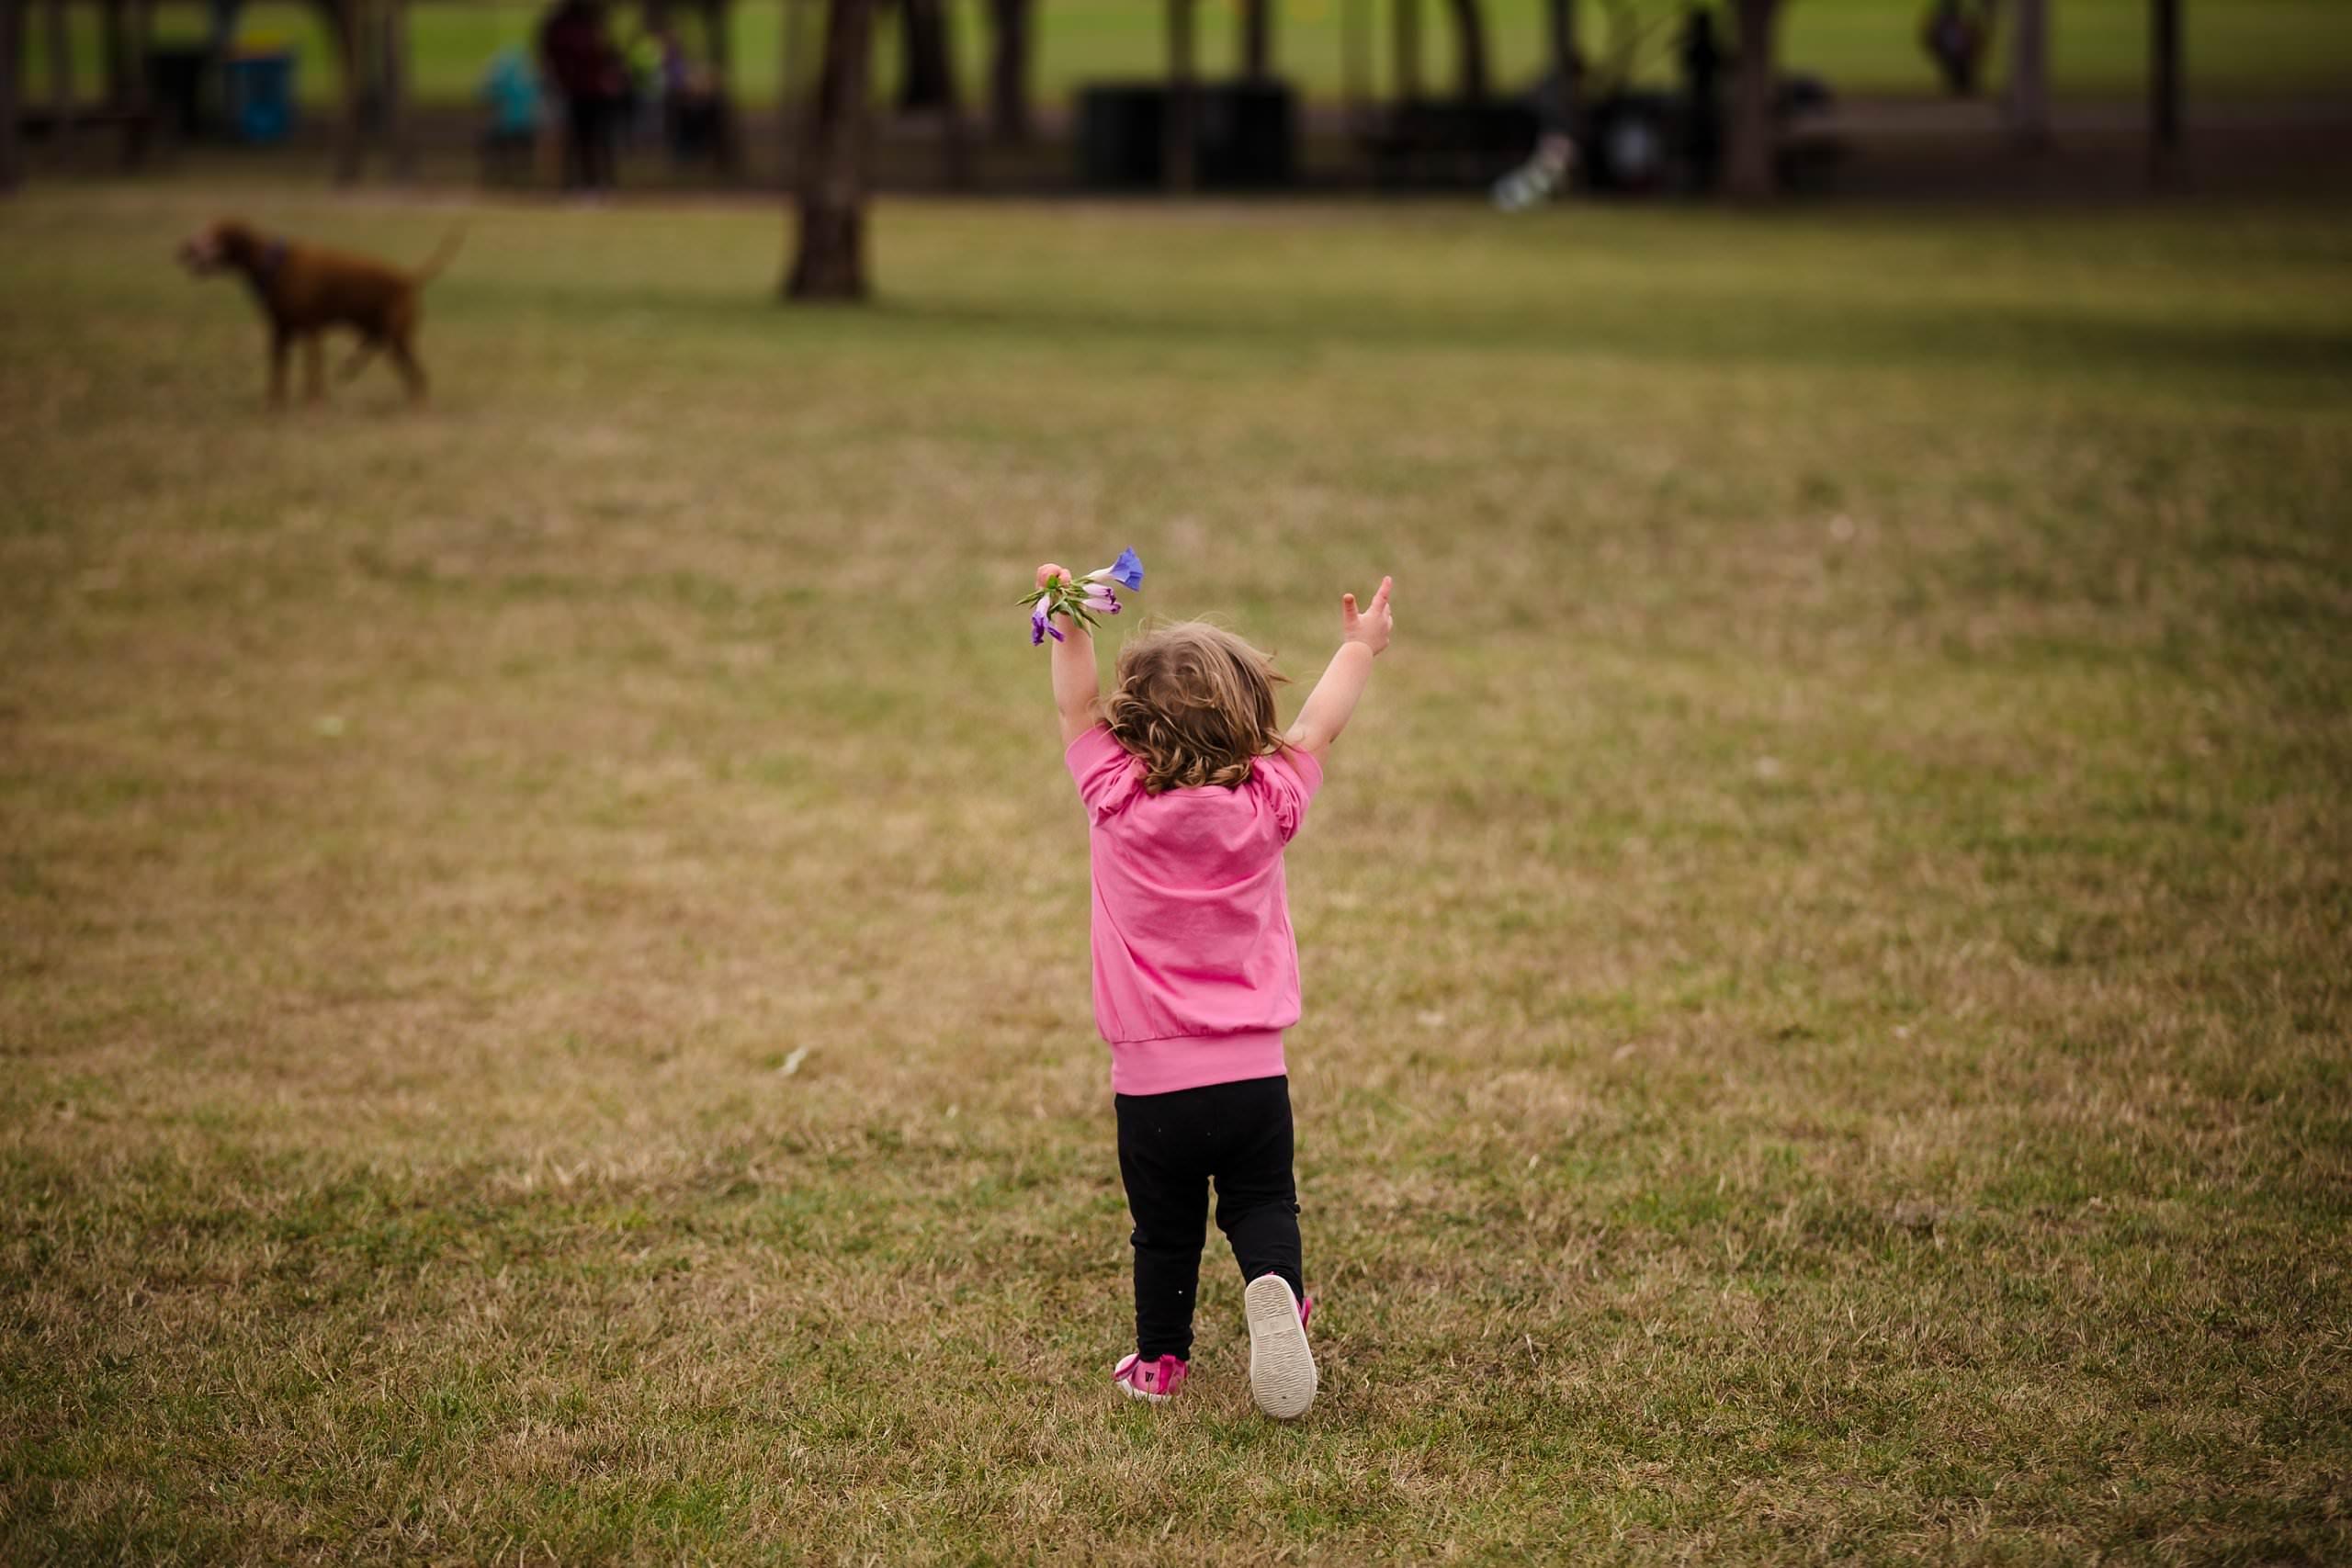 brighton maternity photographer captures toddler running through the park with hands in the air